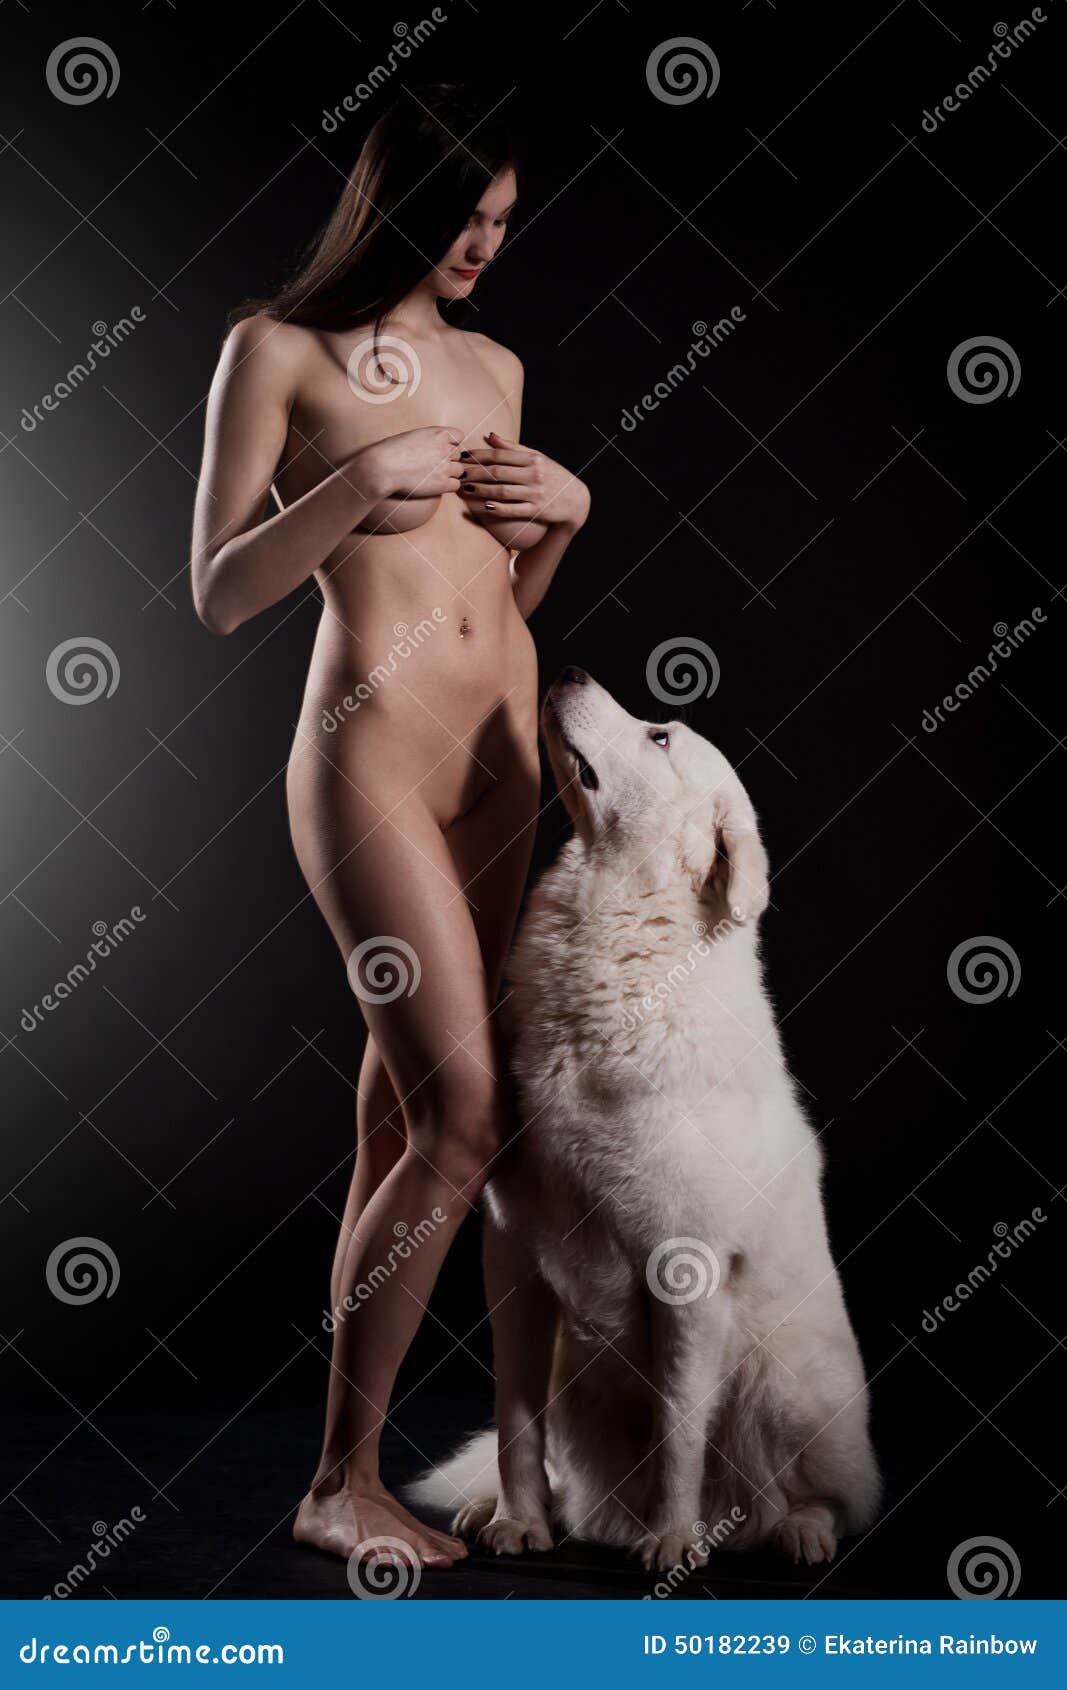 daniel mulheron recommends nude women and dogs pic